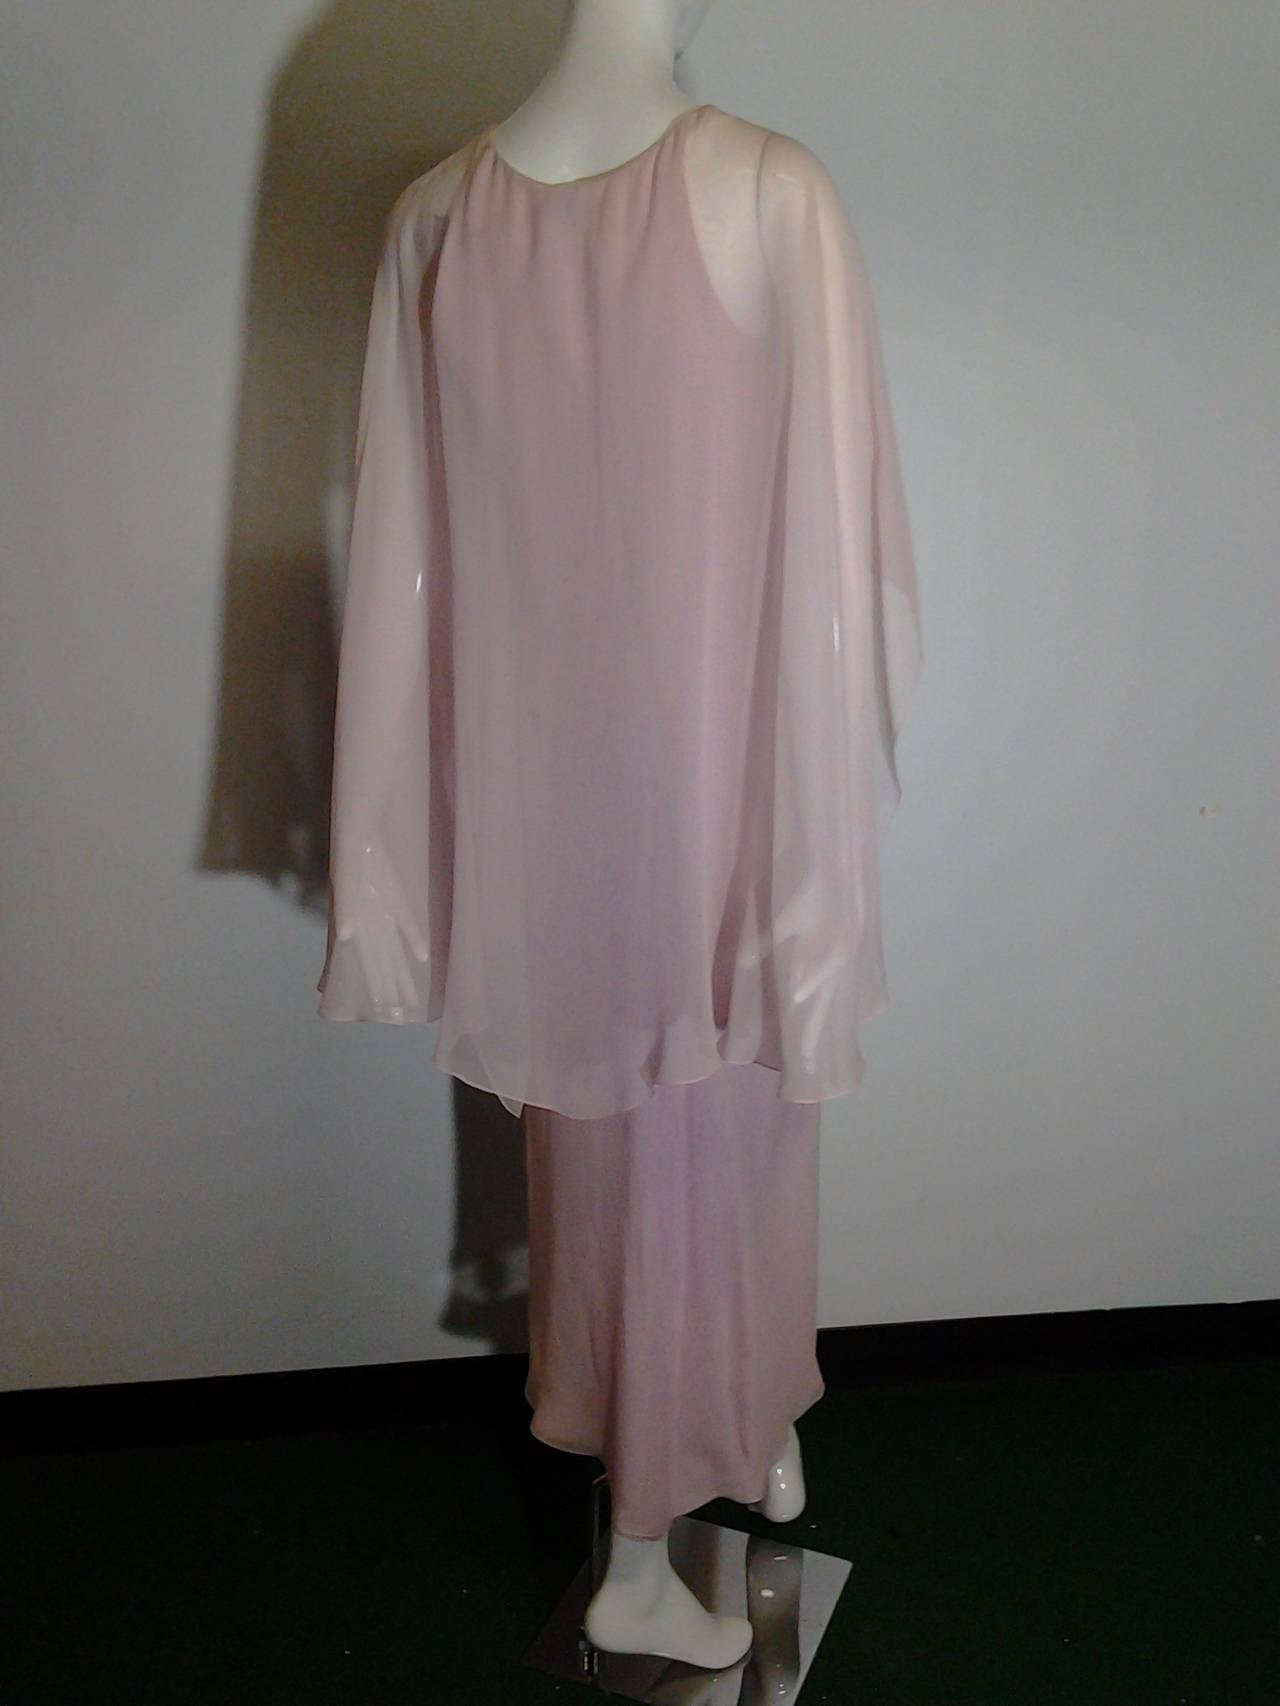 A gorgeous 1970s Halston orchid pink silk chiffon sheath dress in layers with an attached silk chiffon ruffle-edged overlay.